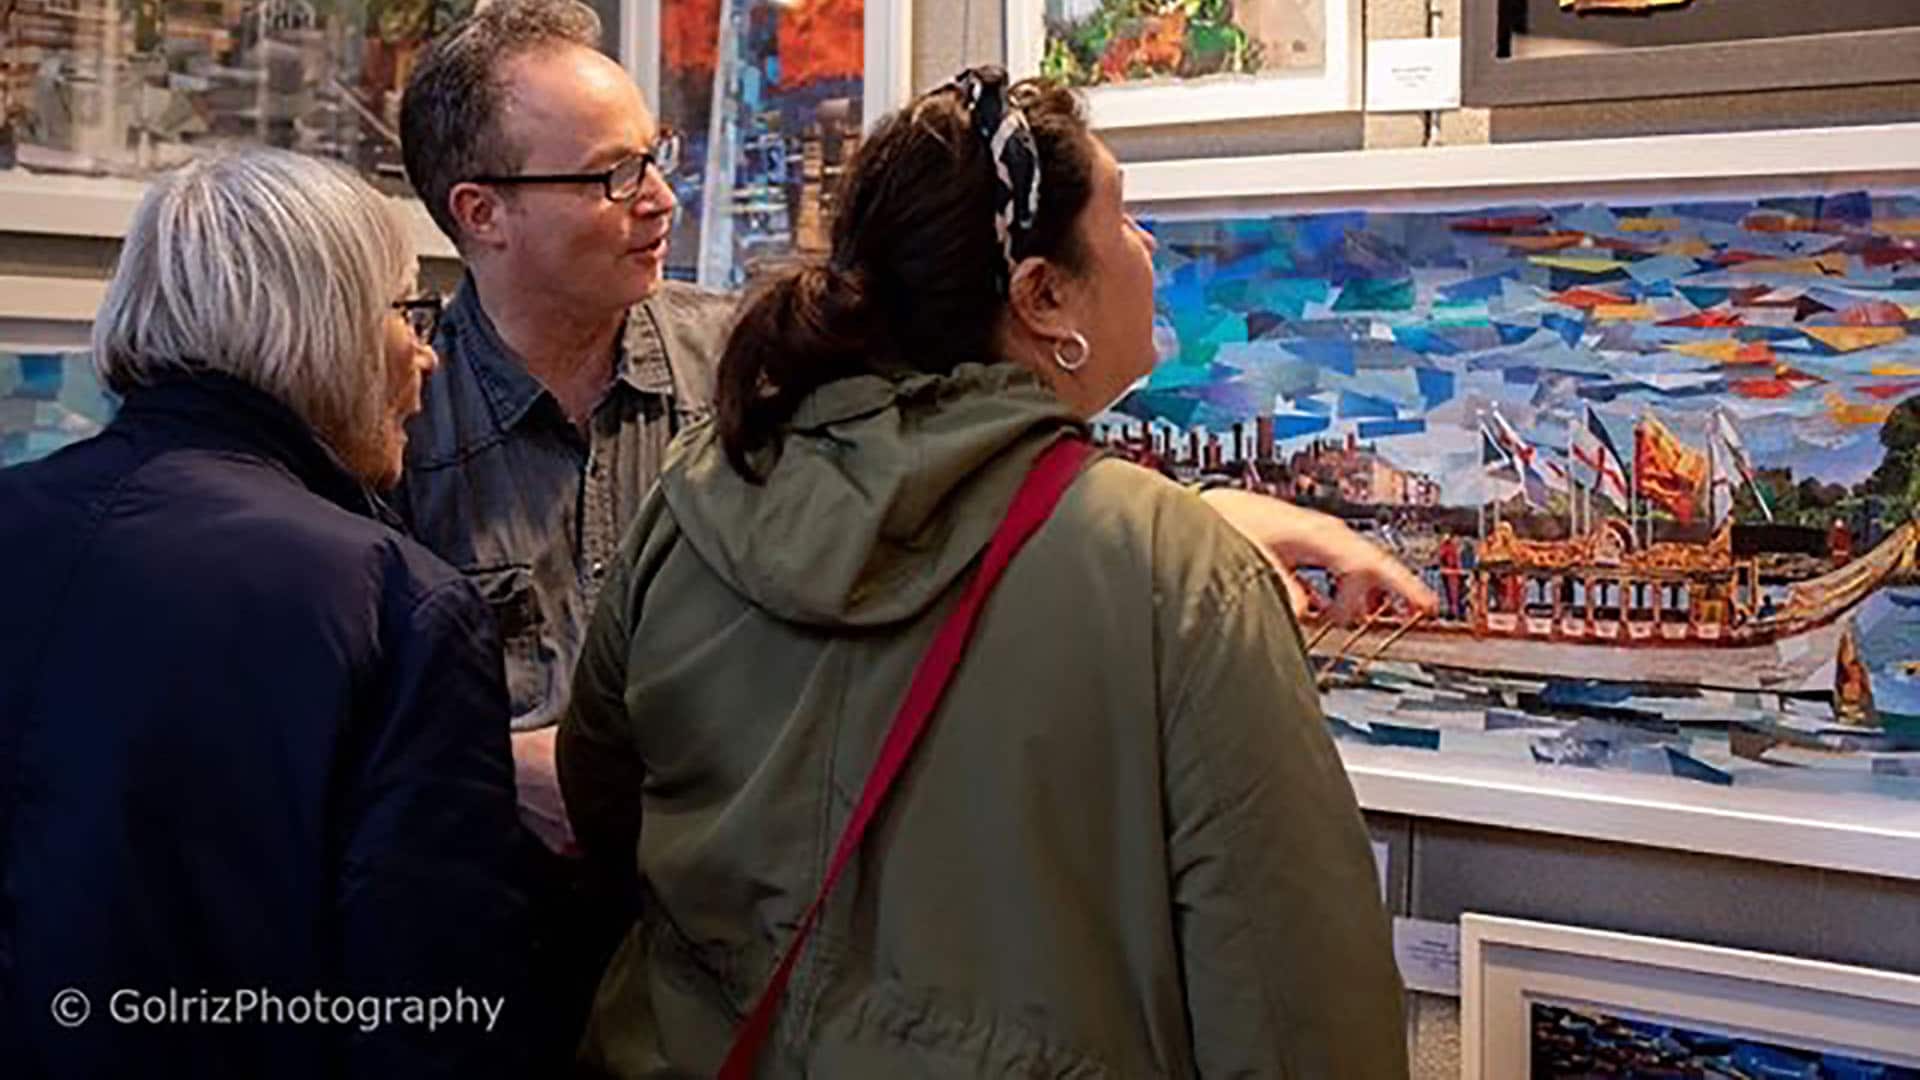 A photograph of two women and a man looking at colourful paintings, the man is pointing and explaining the painting.